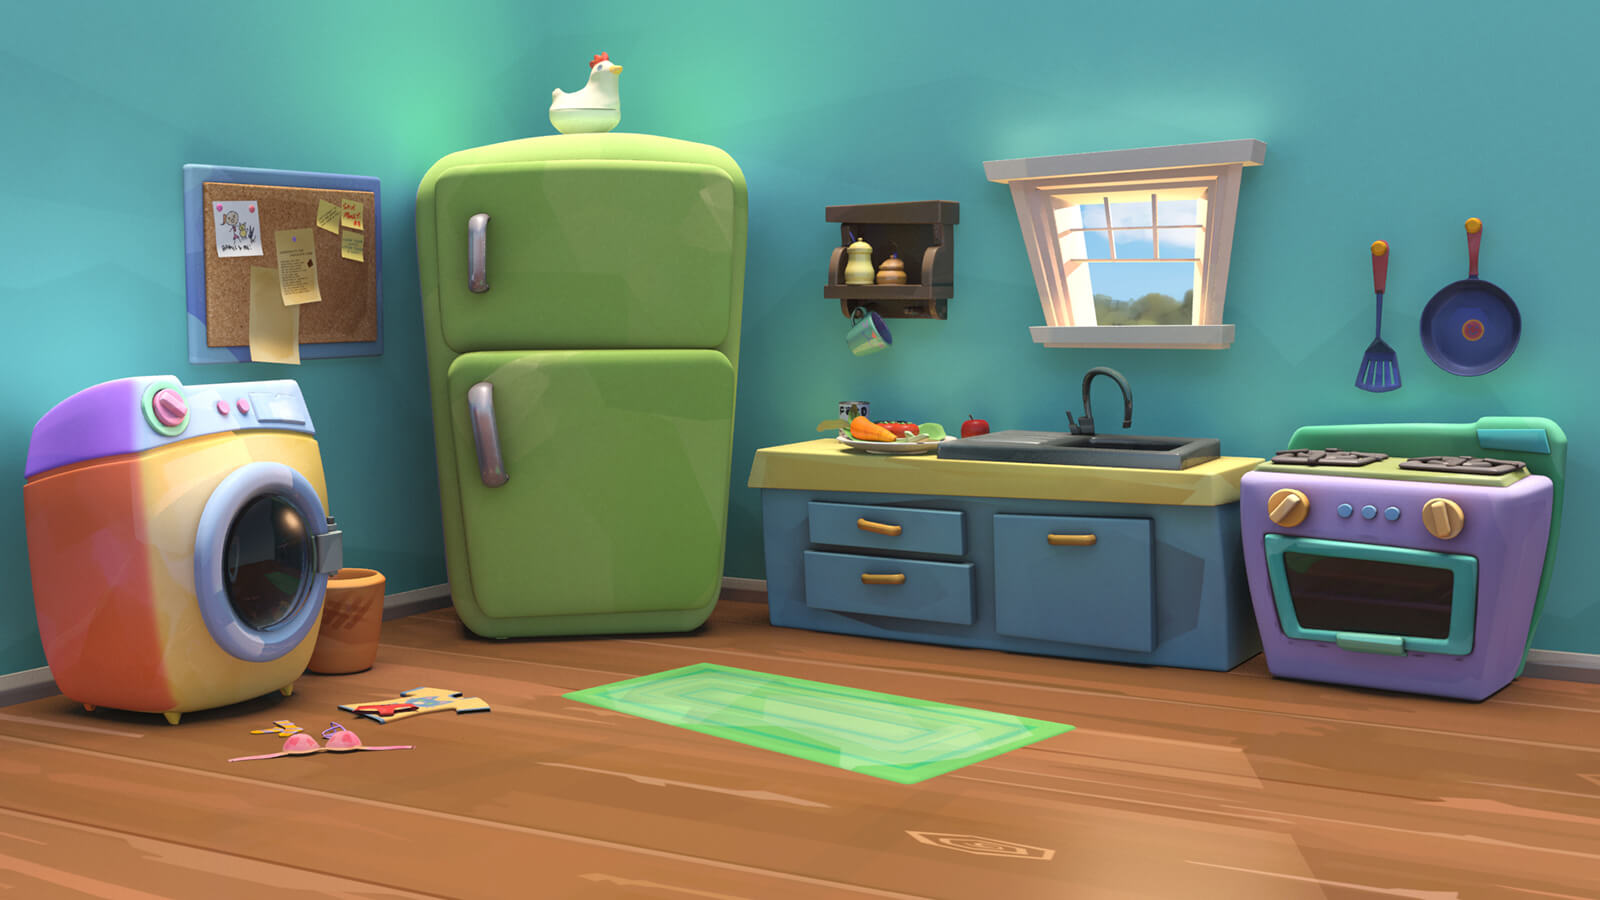 A colorful, stylized CG kitchen scene, with an oven, sink, fridge, and washing machine against a teal-colored wall.